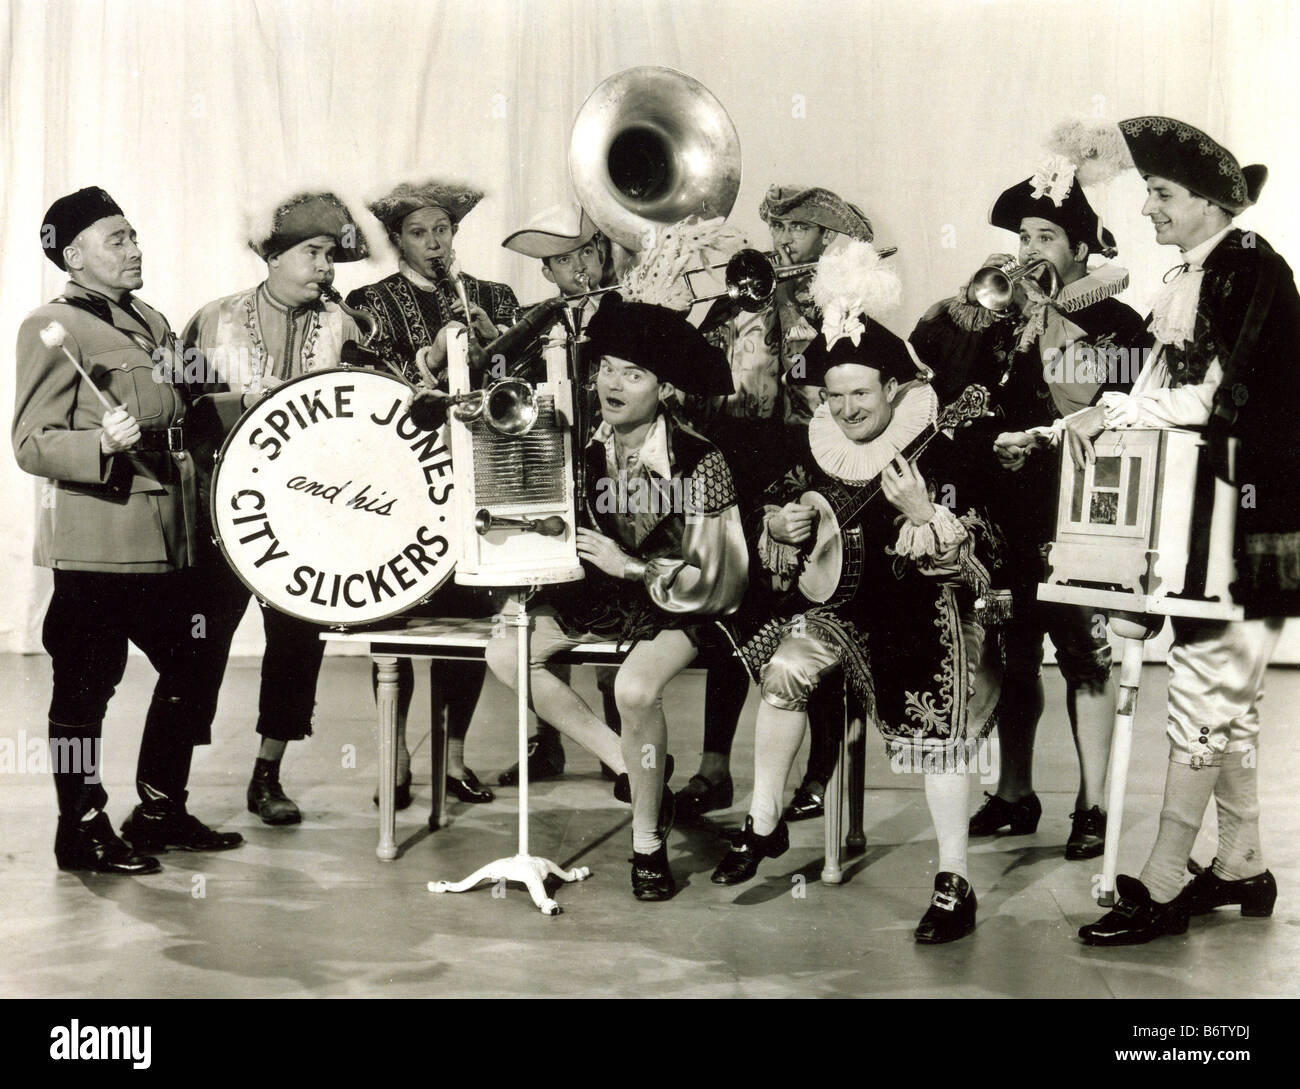 SPIKE JONES AND HIS CITY SLICKERS US 30er Jahre band Stockfoto